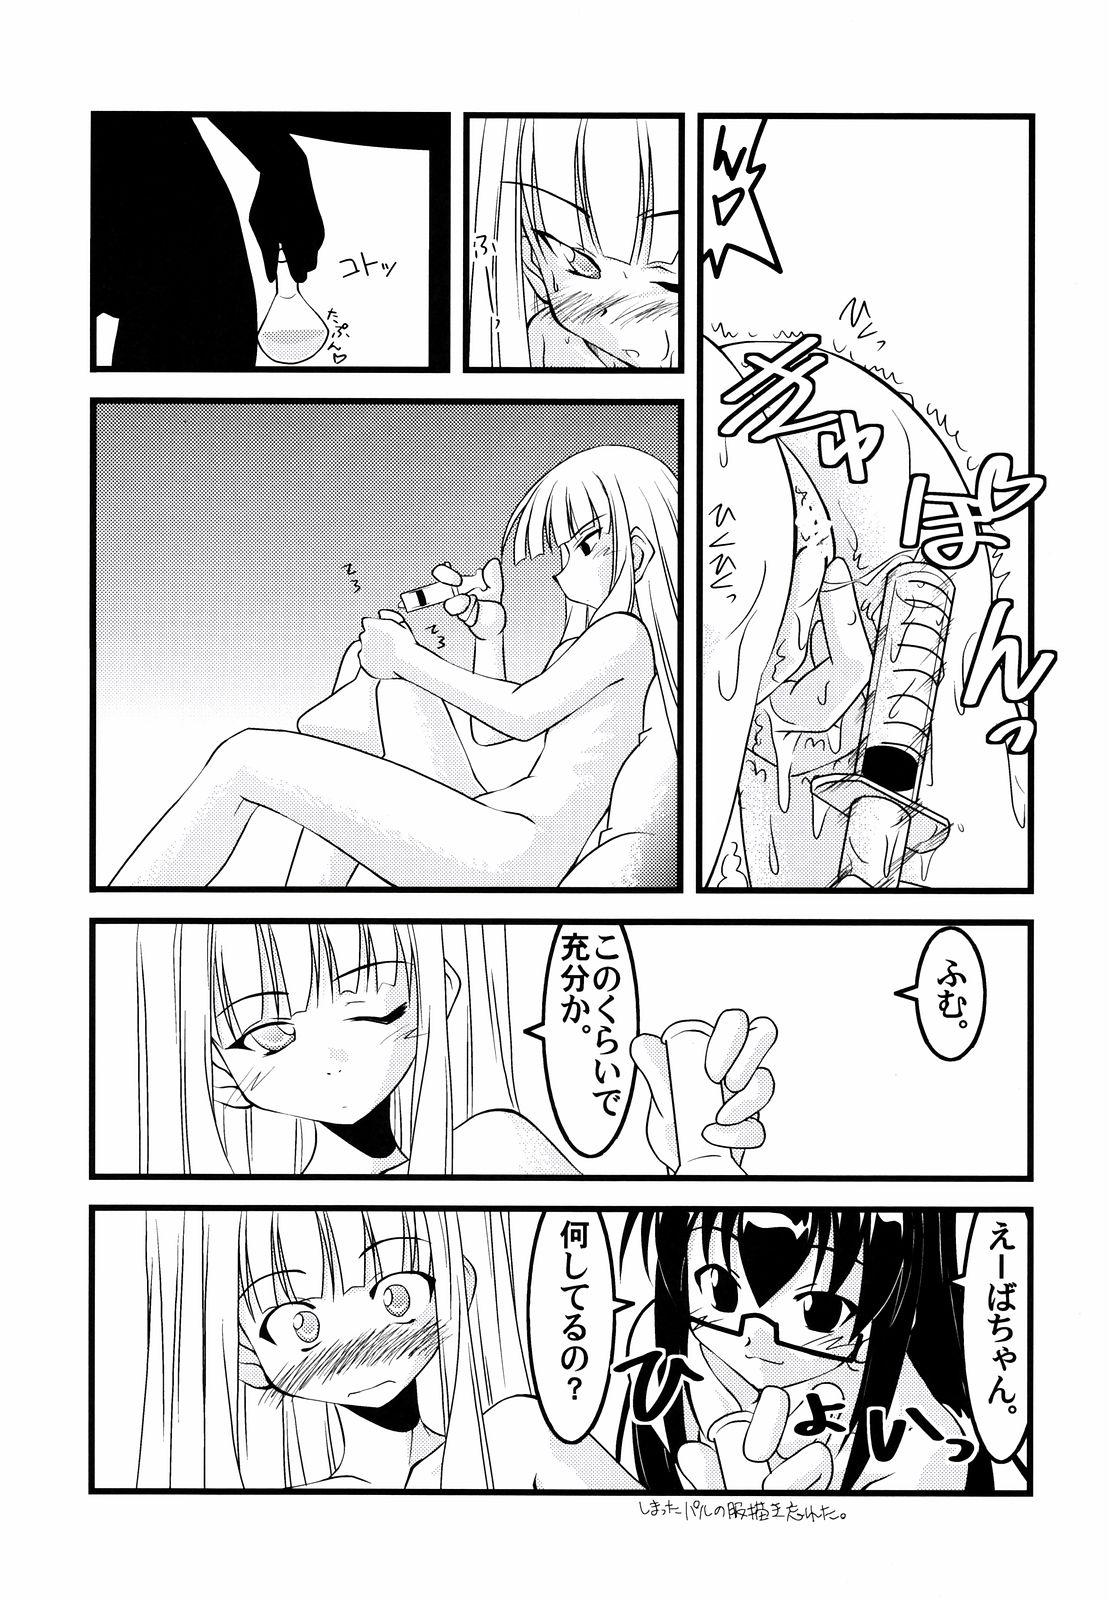 Amatures Gone Wild Lovelys in the School with Dream 5 - Mahou sensei negima Perfect Girl Porn - Page 4